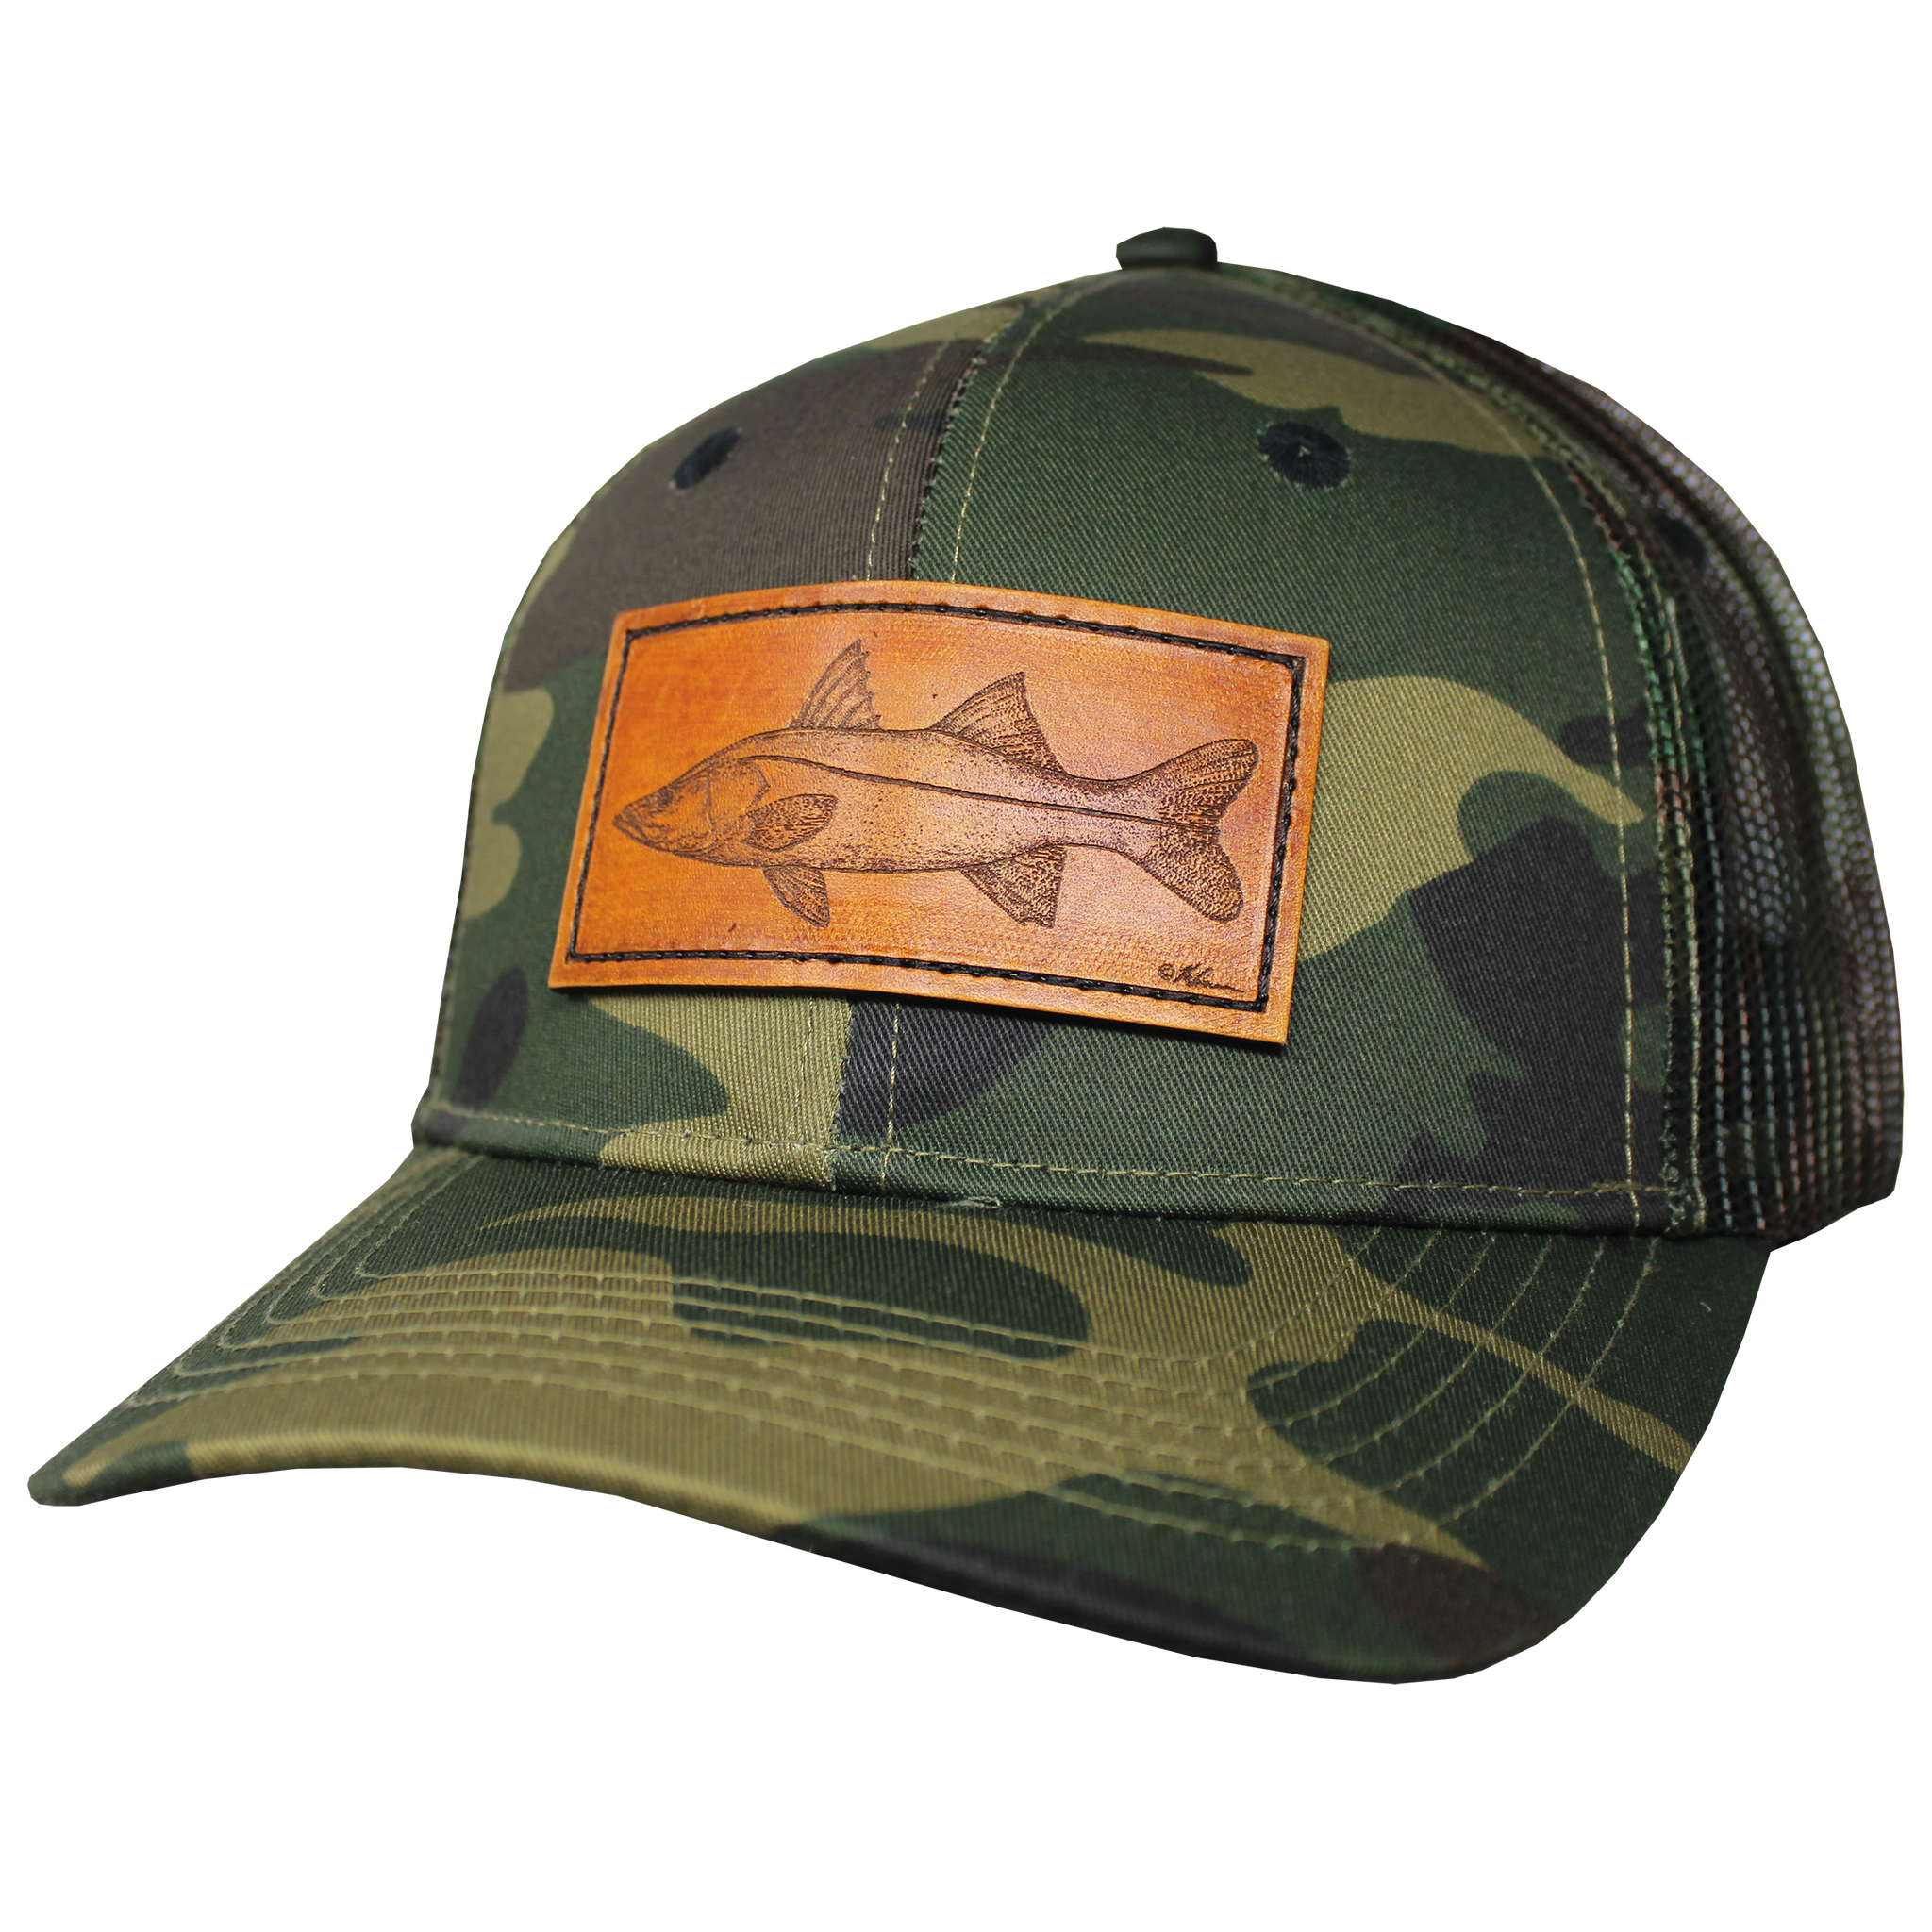 Trucker Performance Cap - Snook Leather Patch